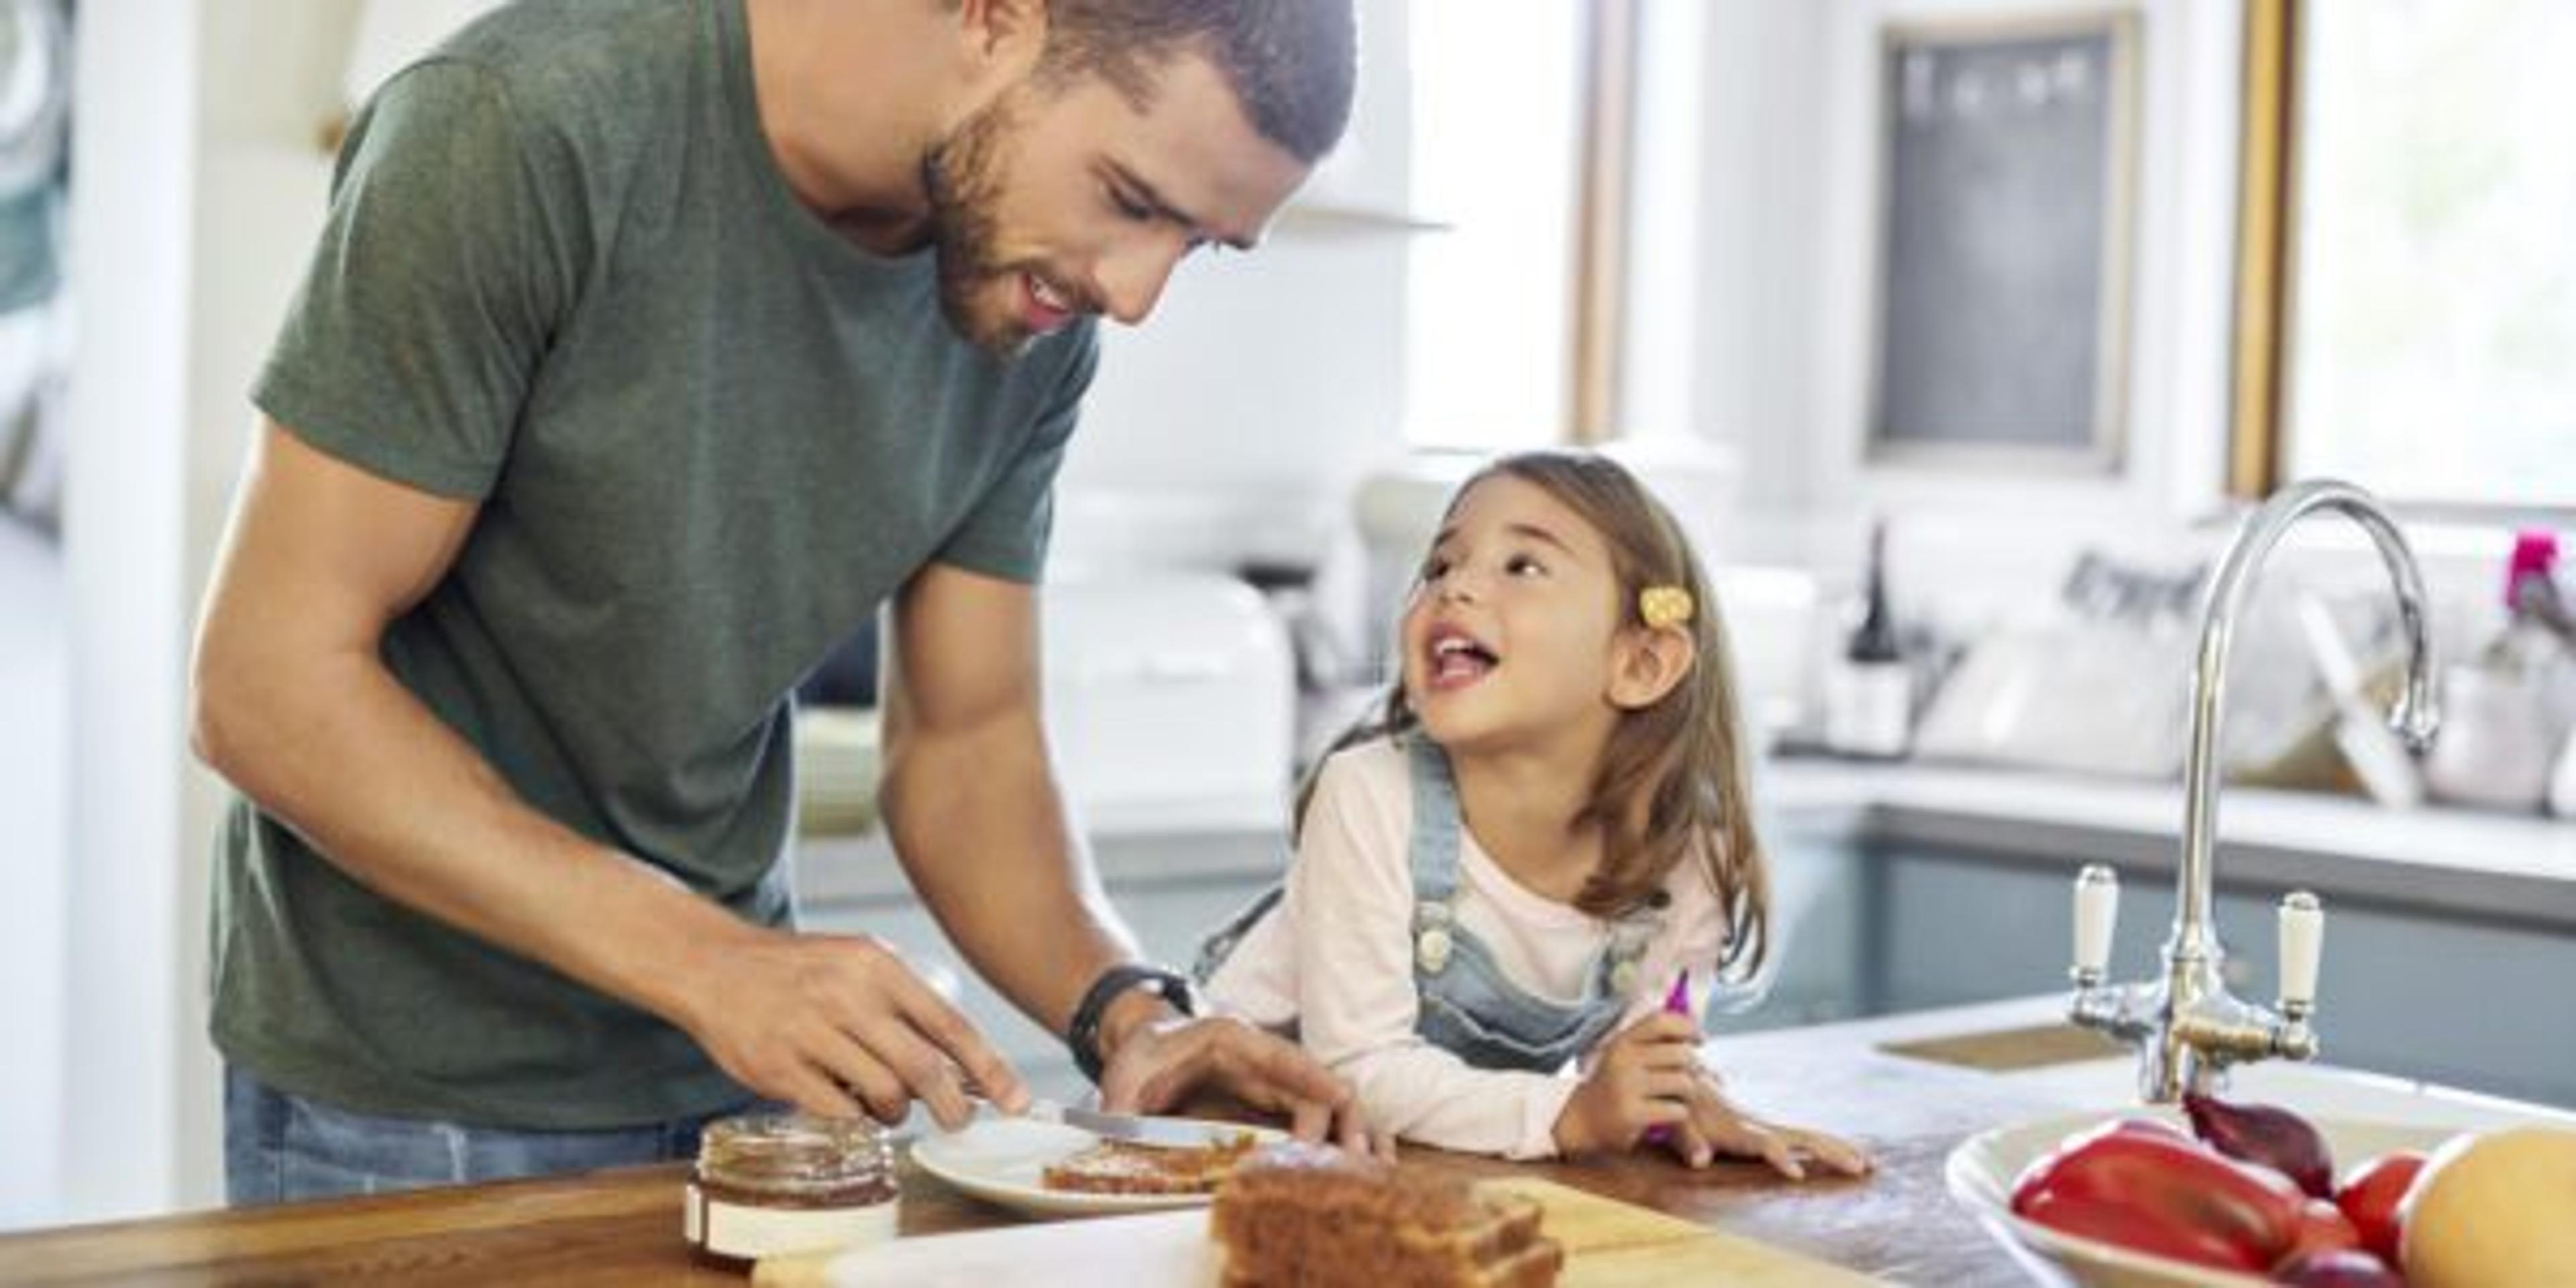 Man standing with daughter while making sandwich